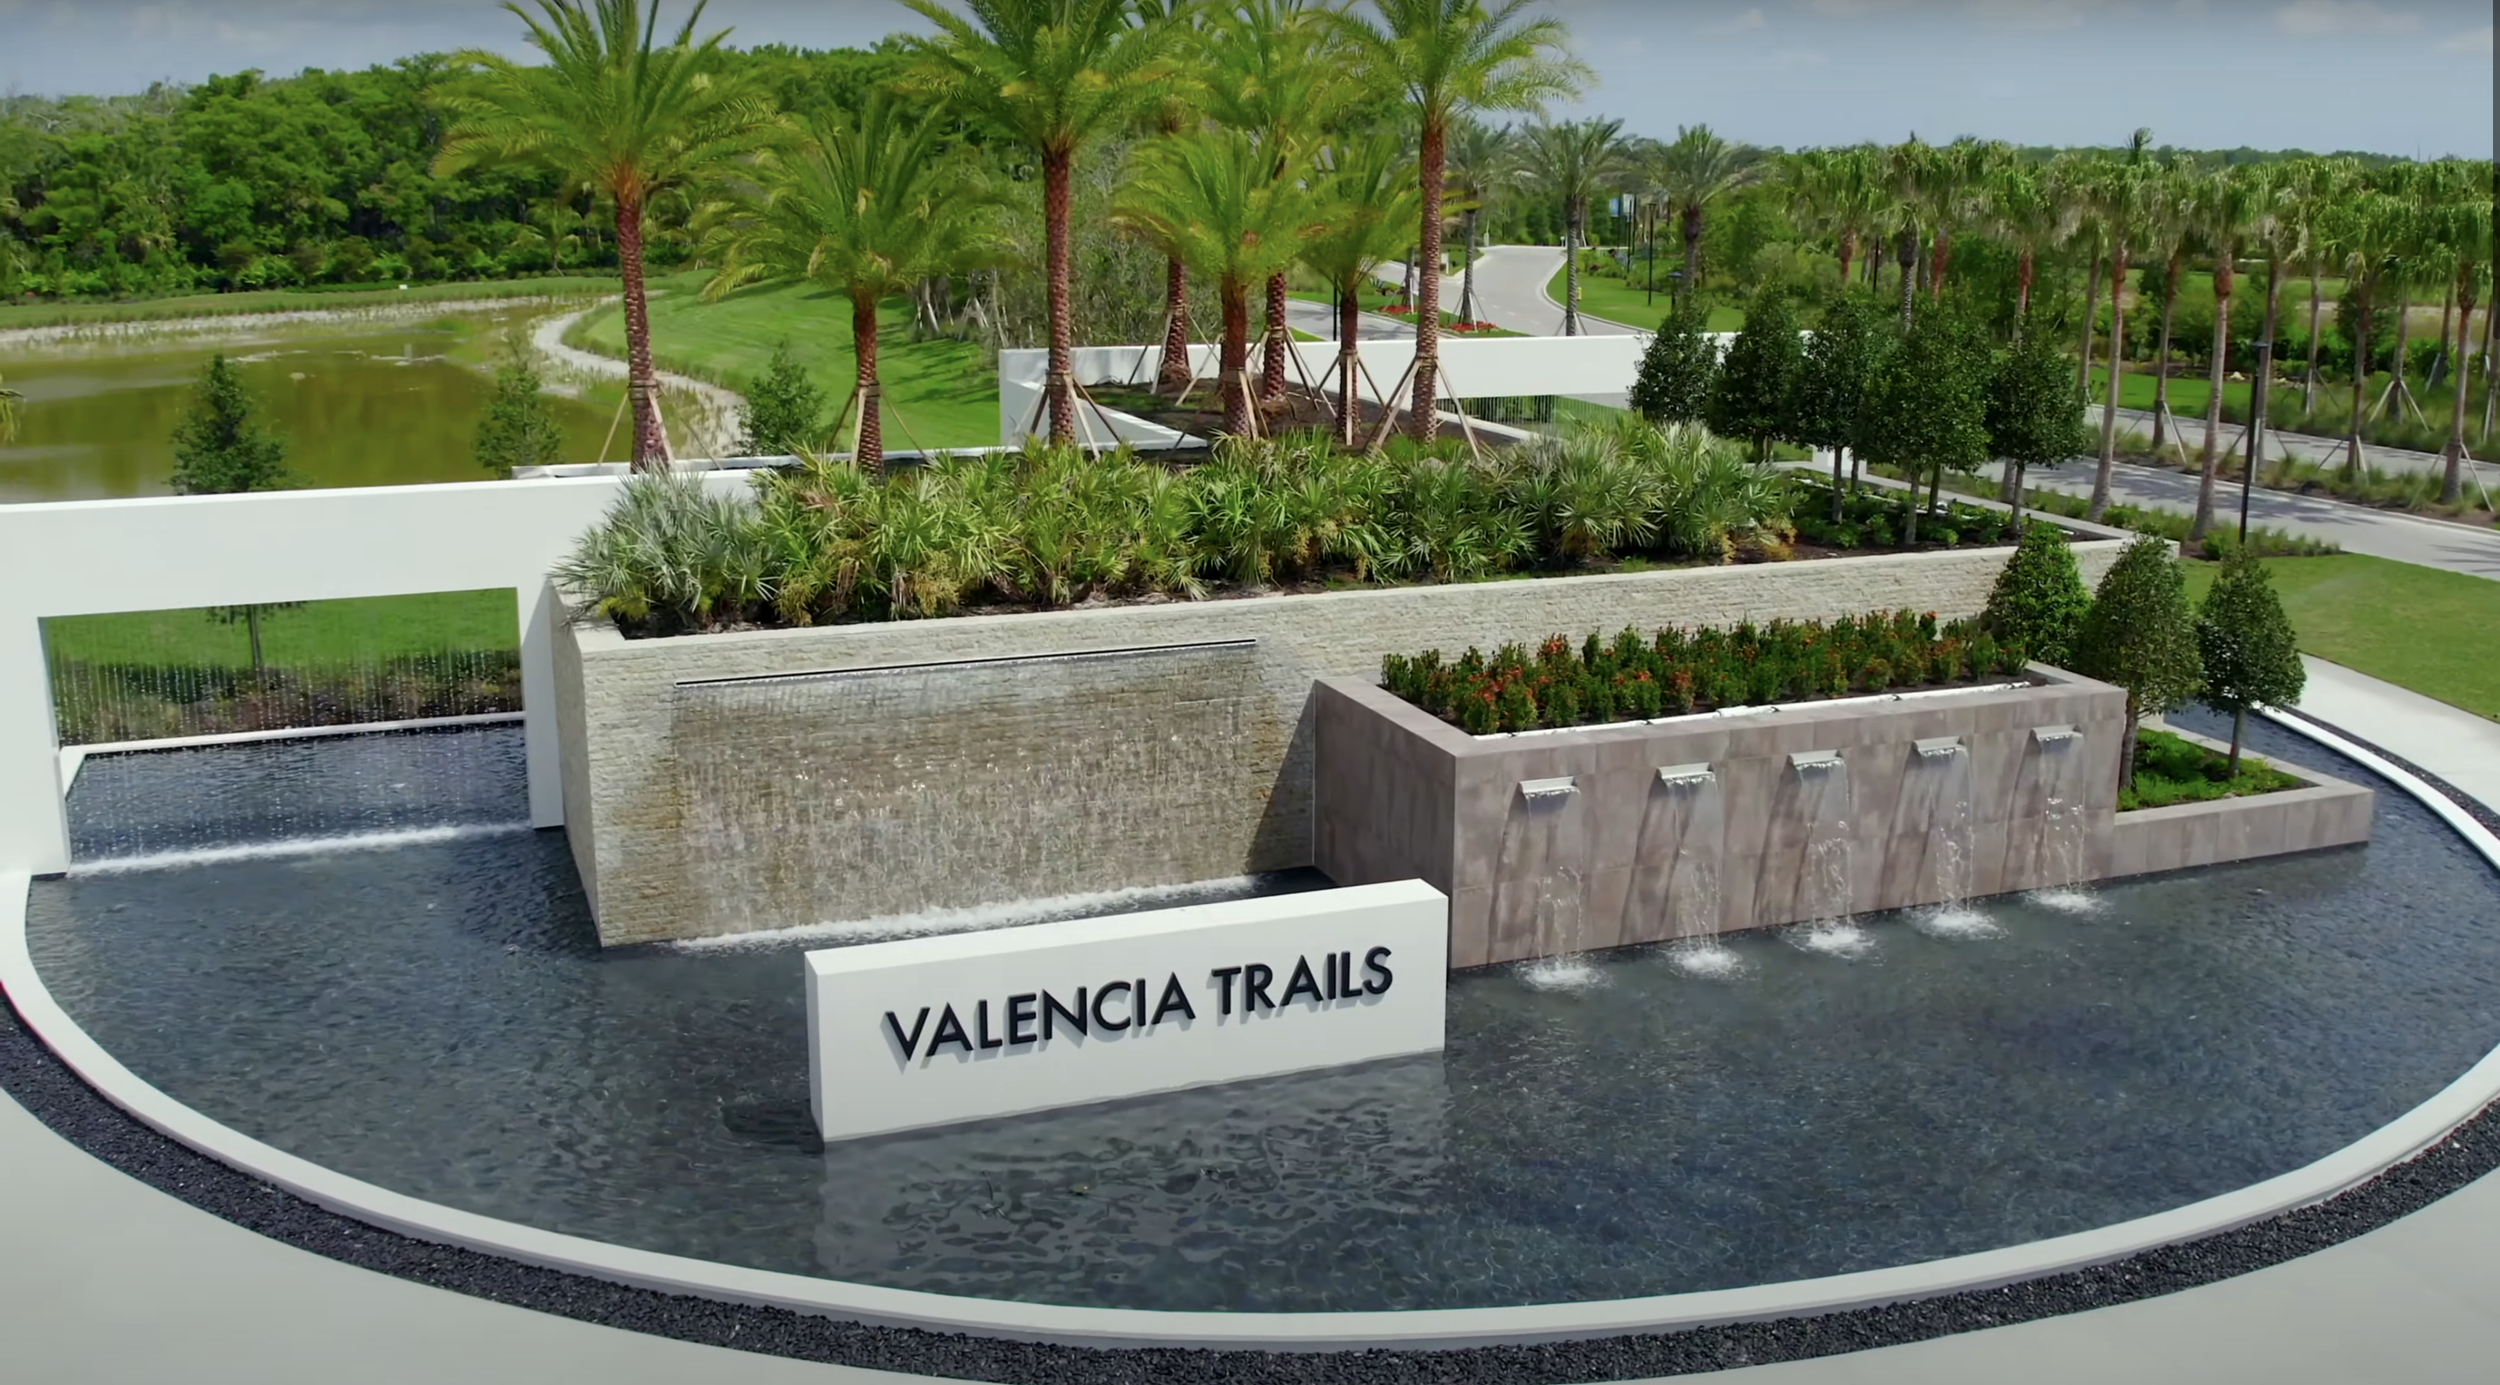 Valencia Trails North Naples Entrance off immokalee Road.png